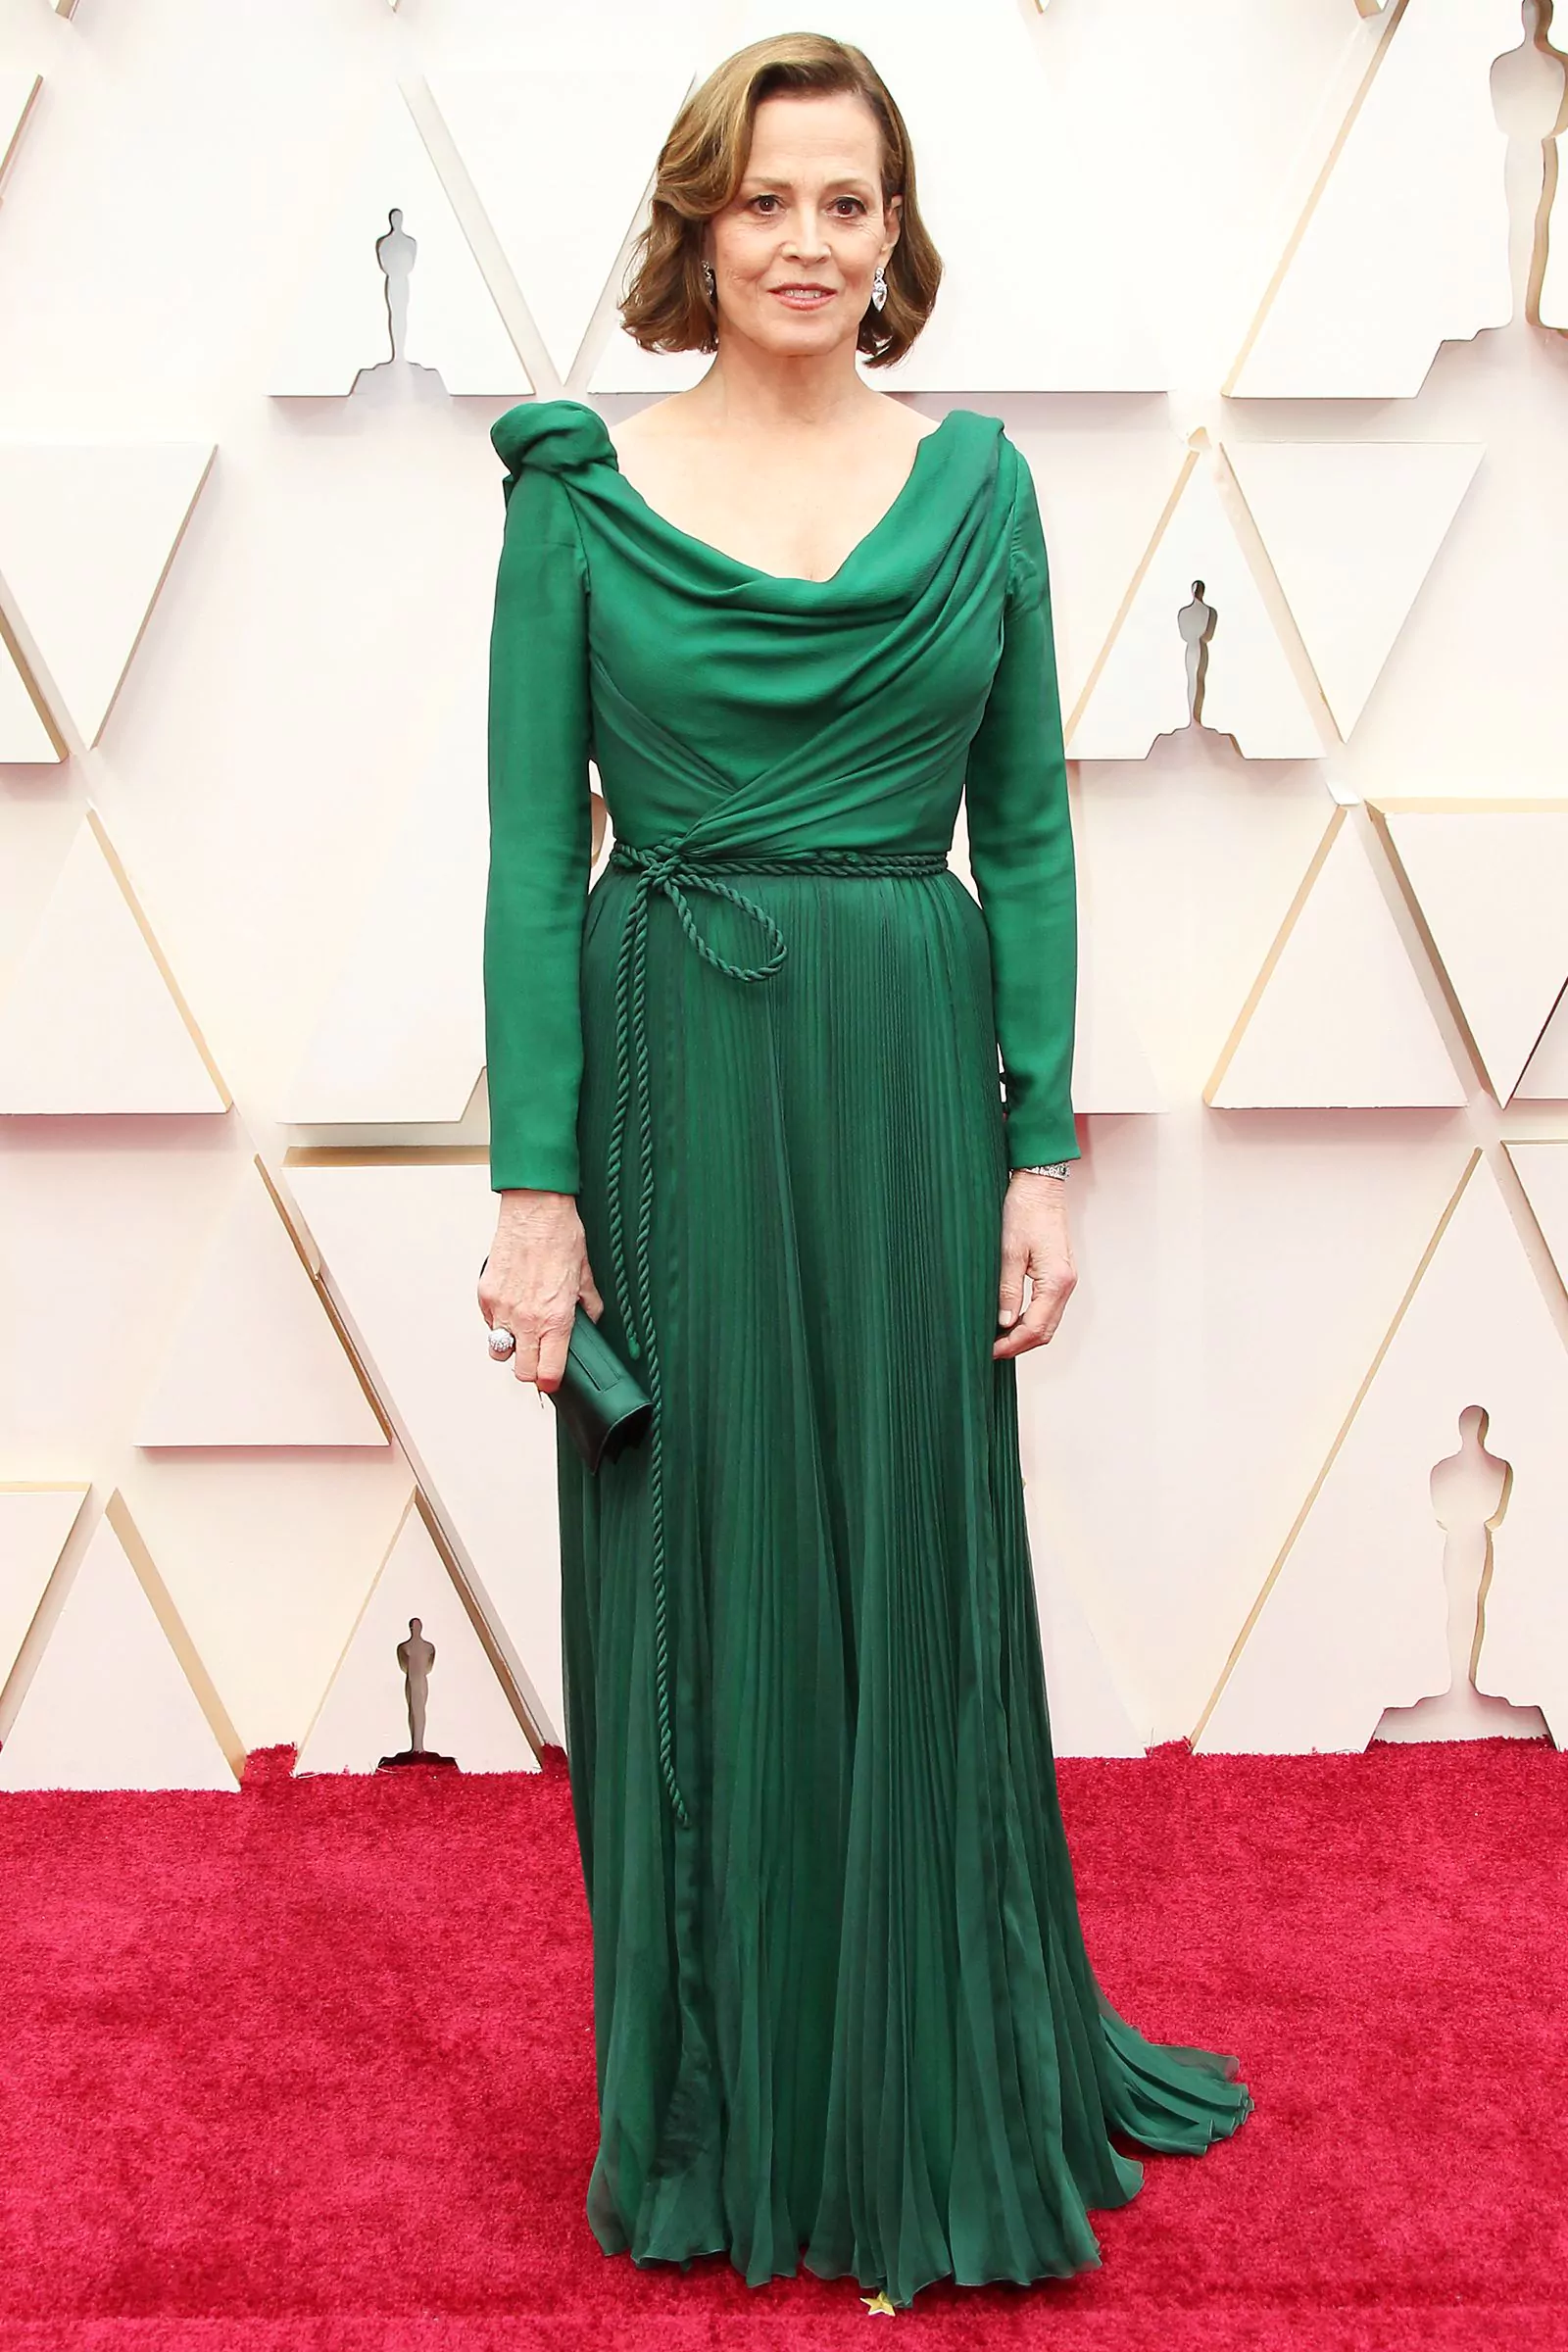 Sigourney Weaver at the 92nd Academy Awards in Los Angeles on February 9, 2020.